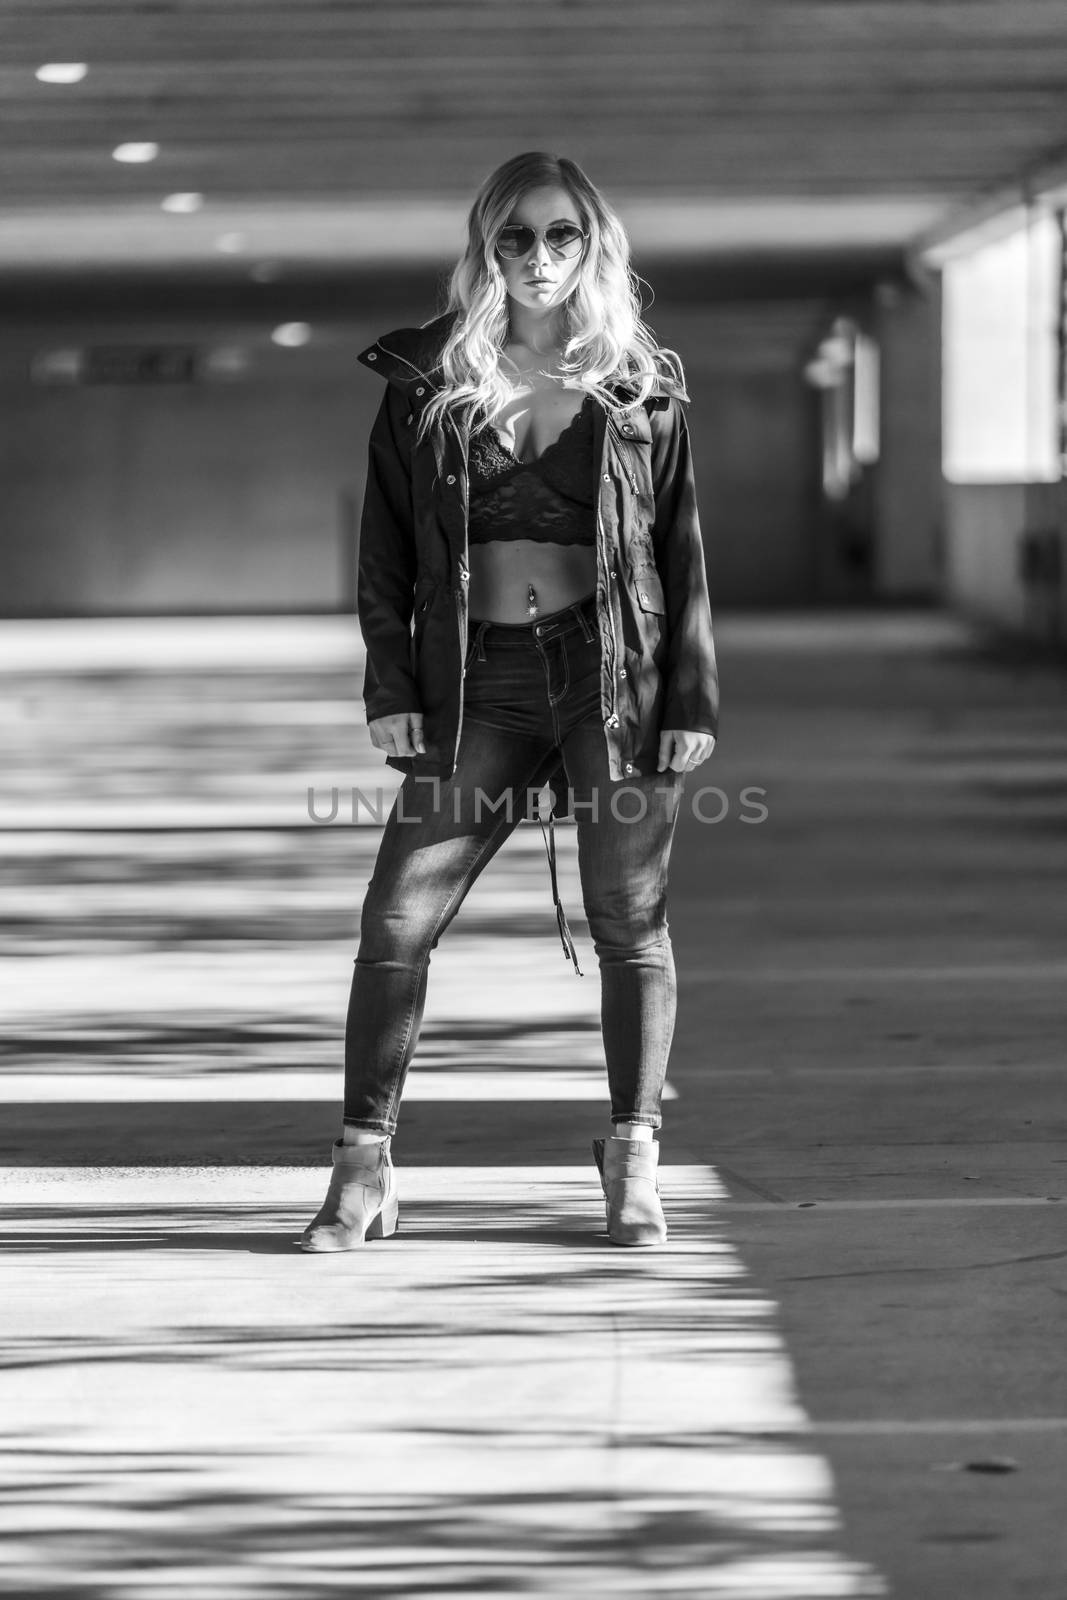 A Lovely Blonde Risque Model Poses In A Parking Deck On An Autumn Day by actionsports